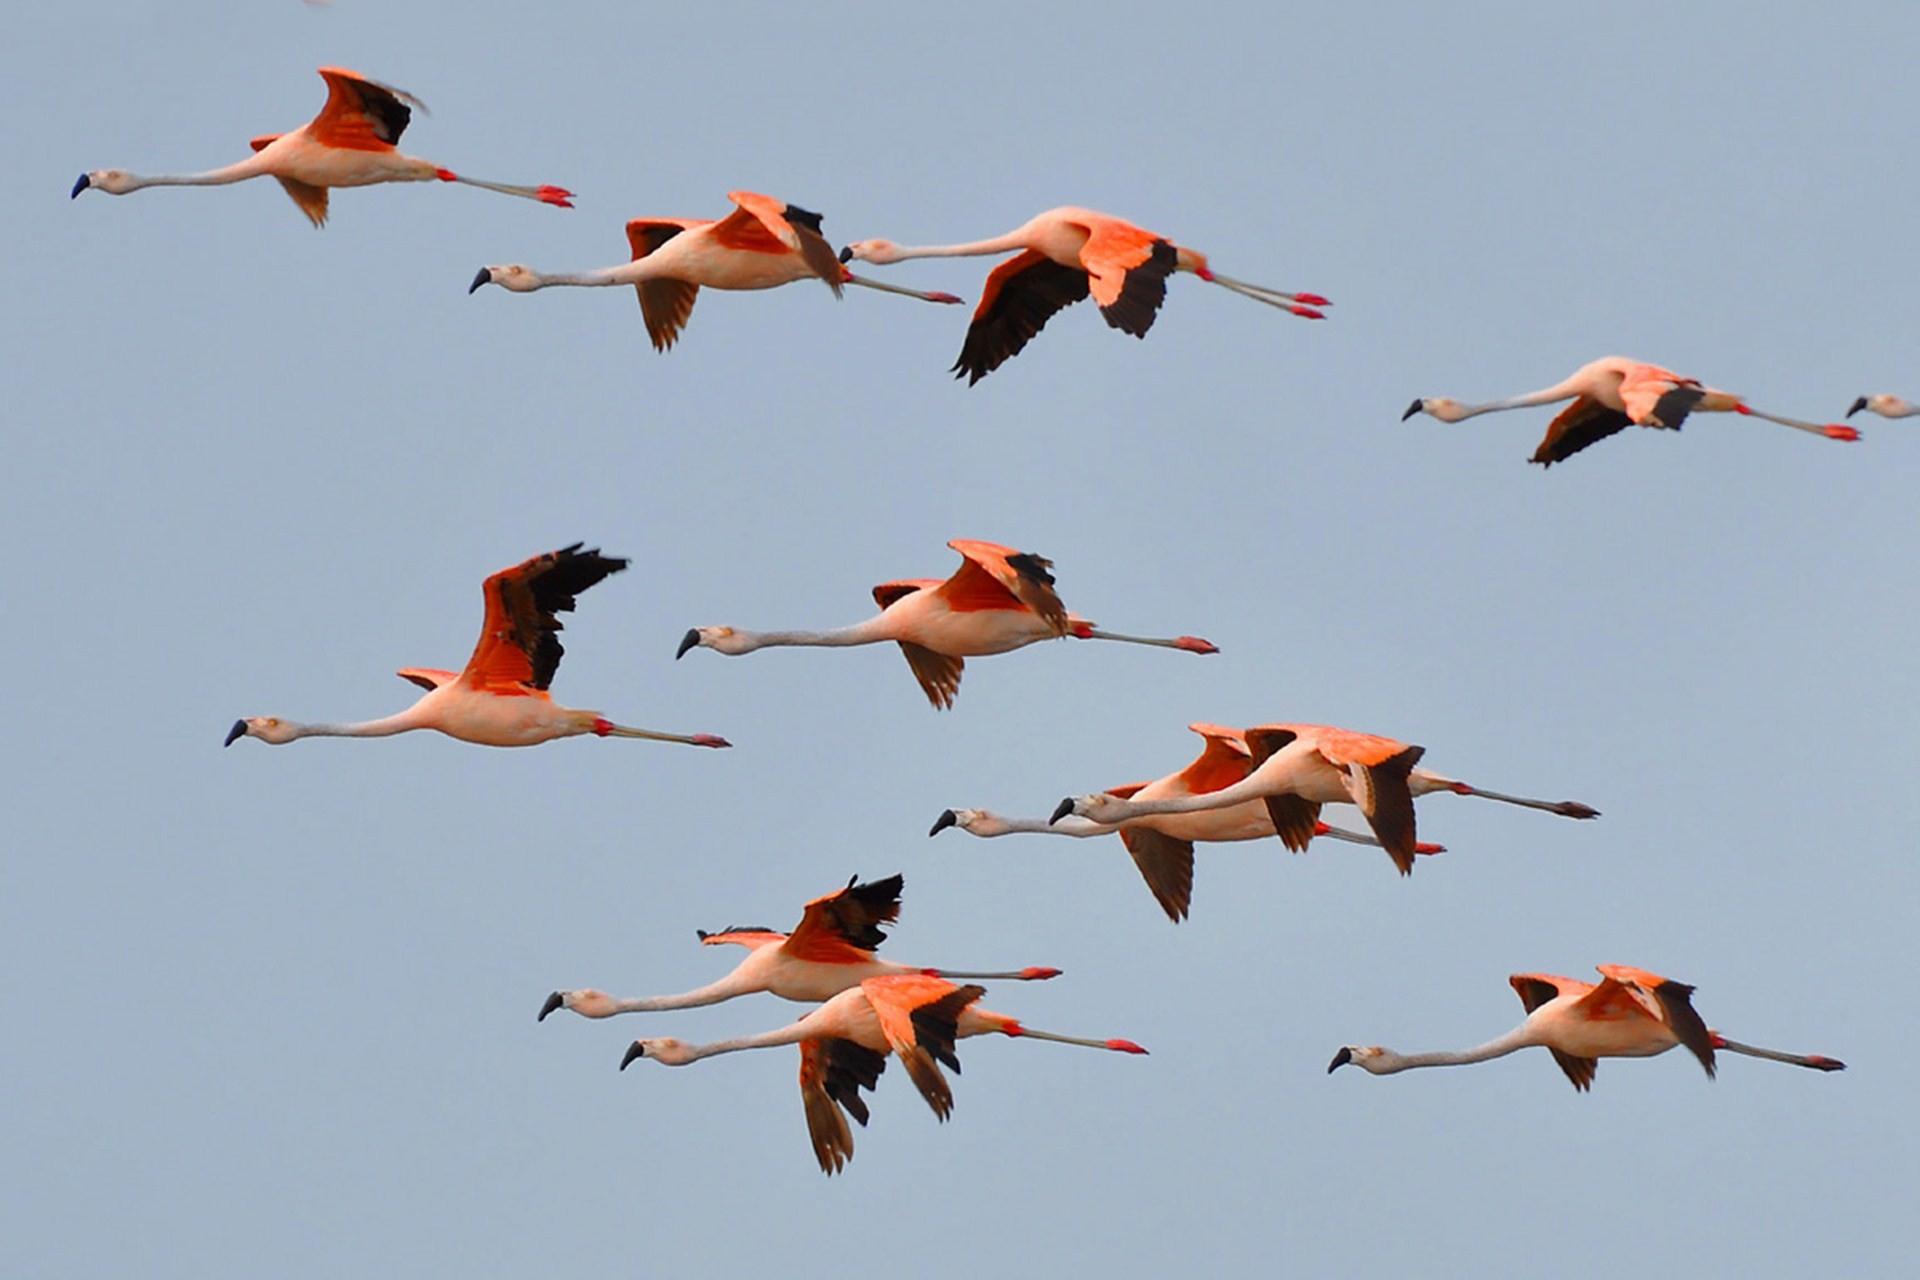 Chilean-Flamingo-Flying-Photos-Phoenicopterus-chilensis-is-a-large-species-of-fl.jpg